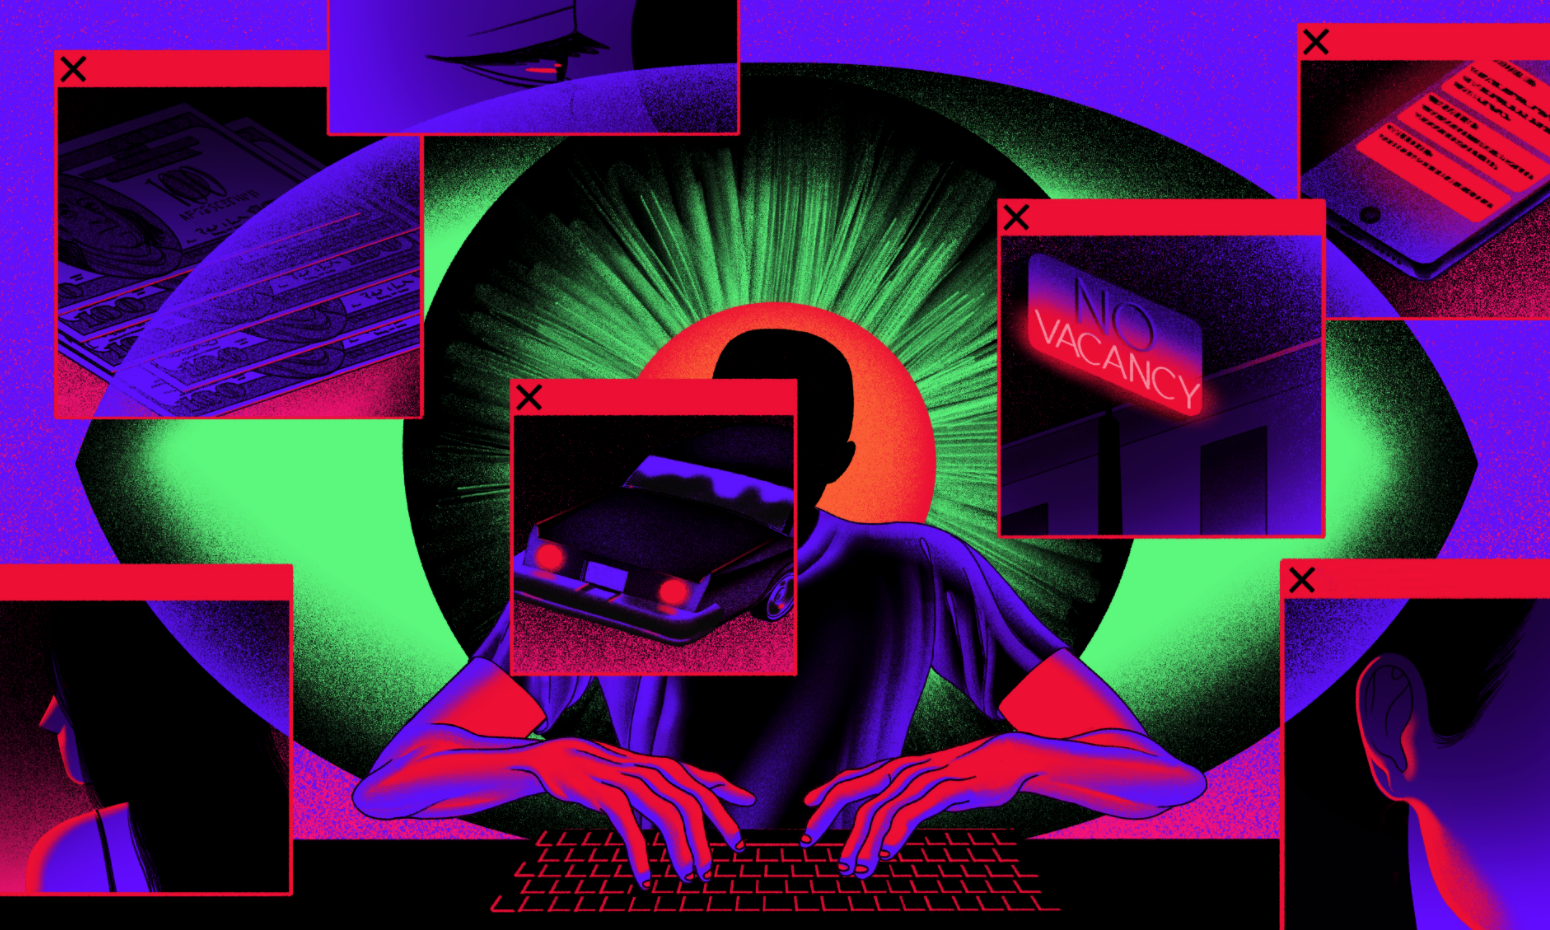 Illustration of a faceless person at a keyboard with a giant eye behind them and computer pop-up windows with images that evoke human trafficking